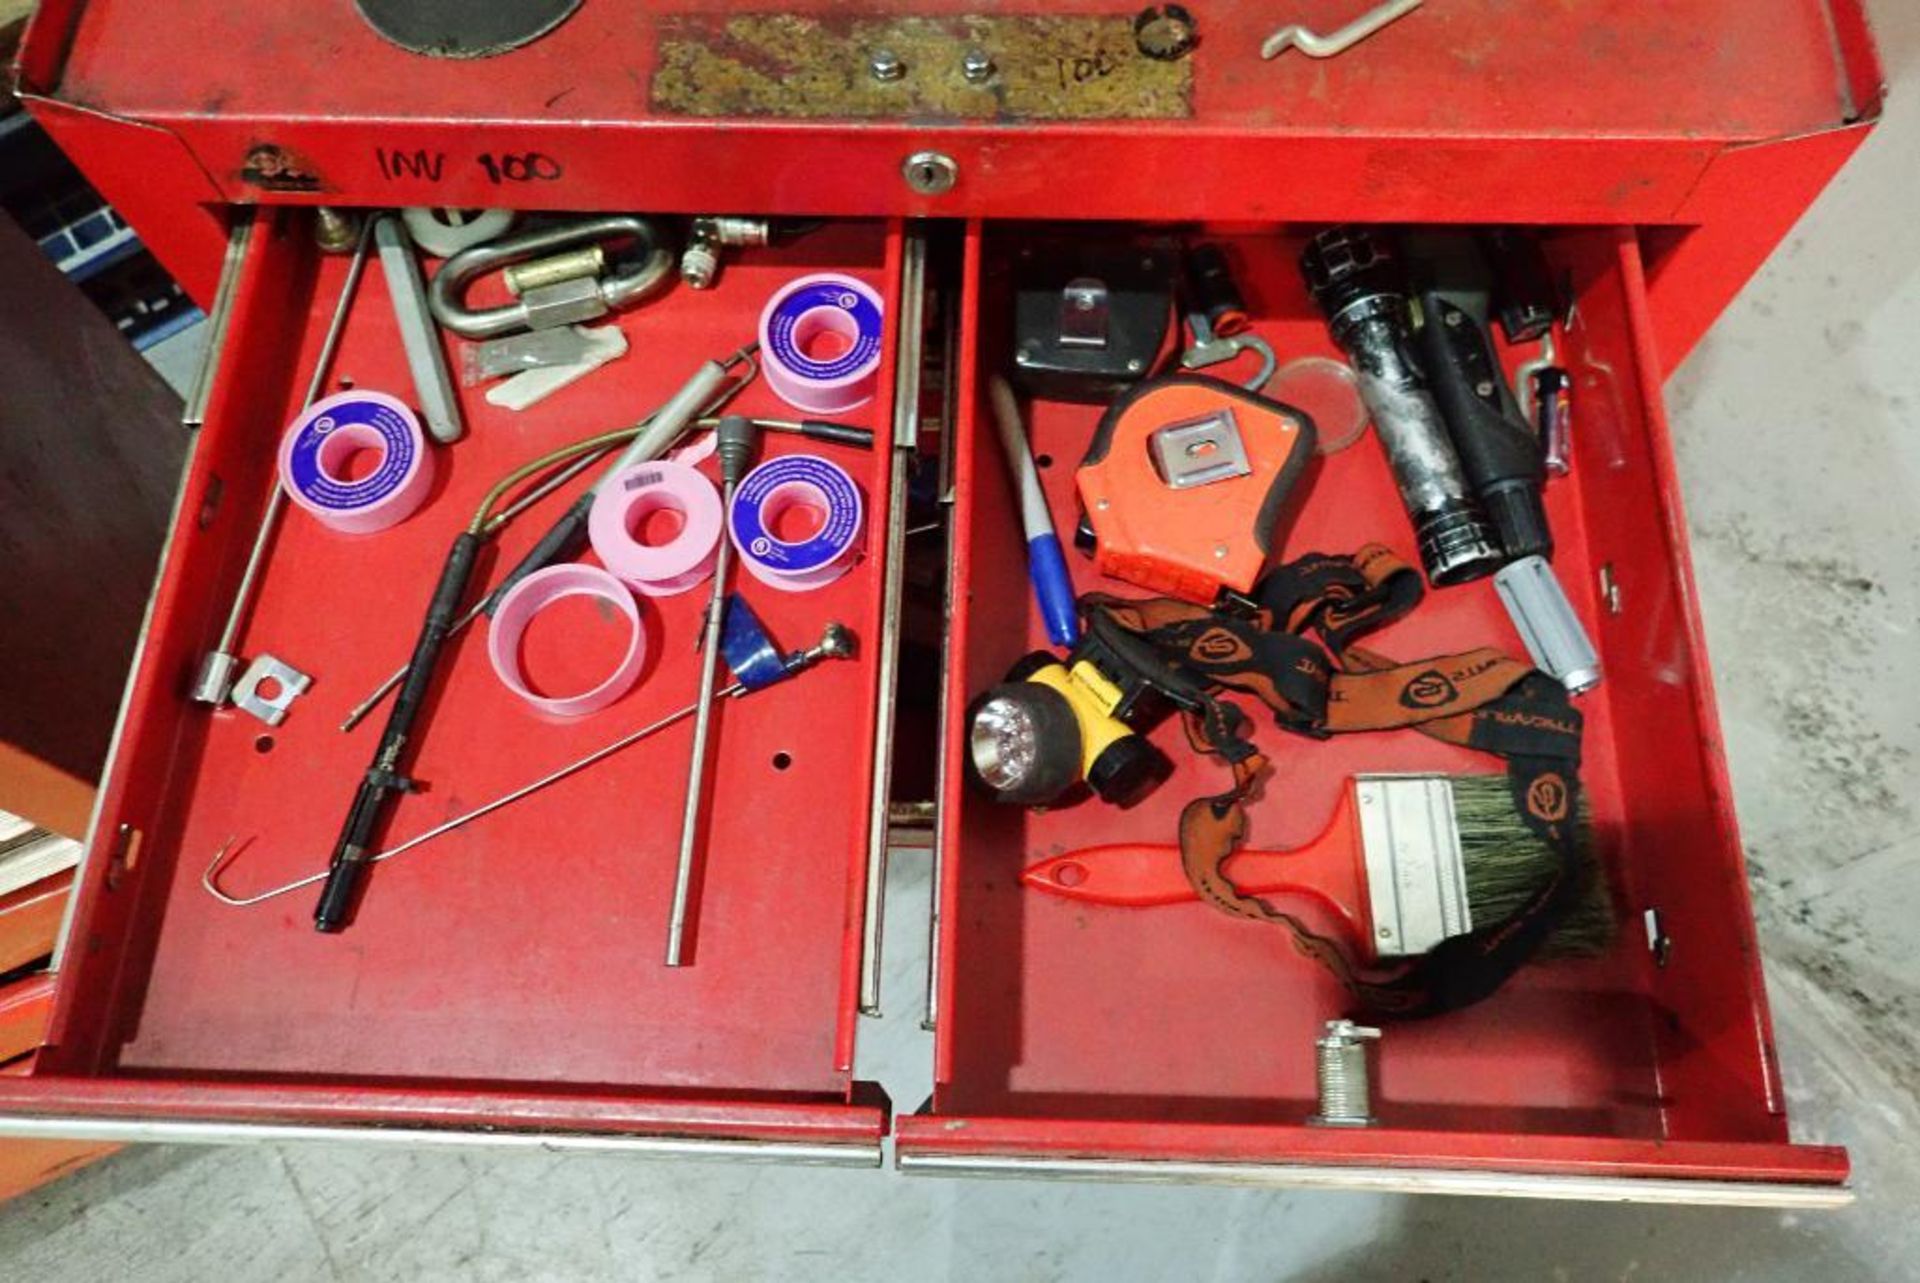 (2) tool chests with contents, wrenches, sockets, drill bits screw drivers, air tools, hammers, plie - Image 7 of 31